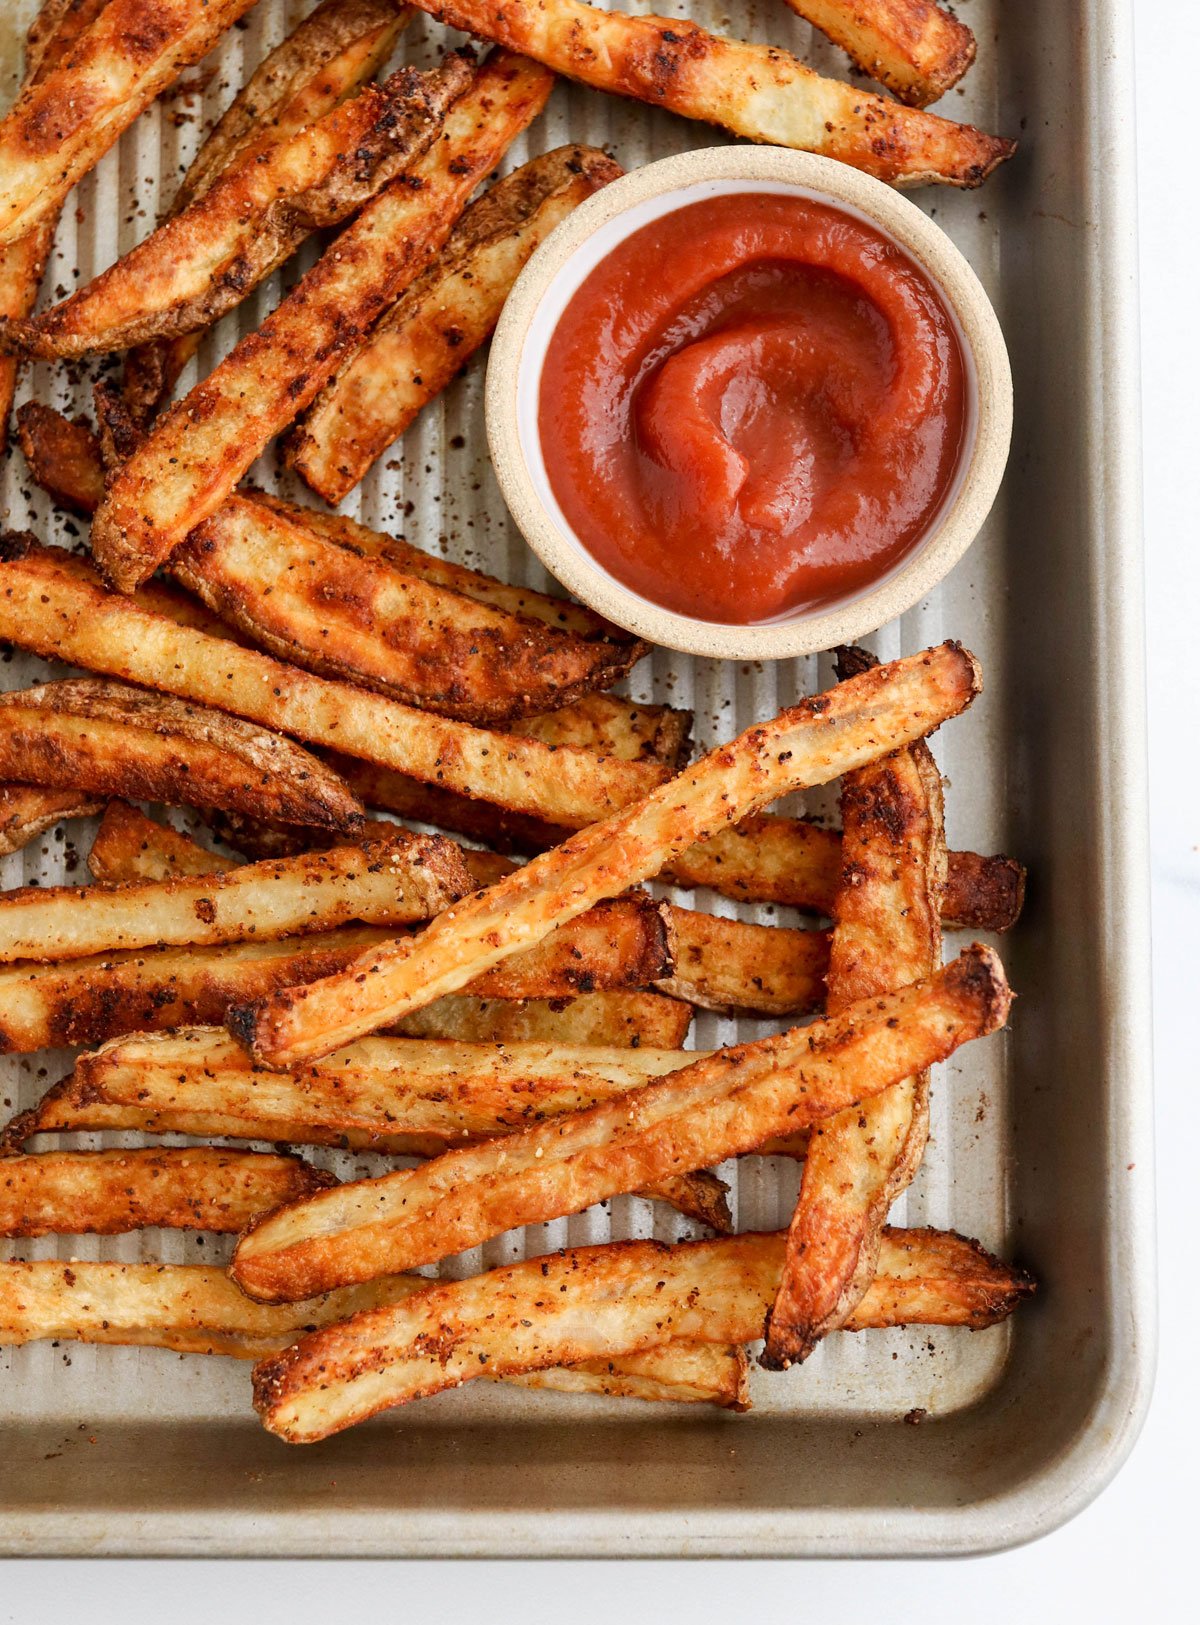 baked french fries on sheet pan with ketchup